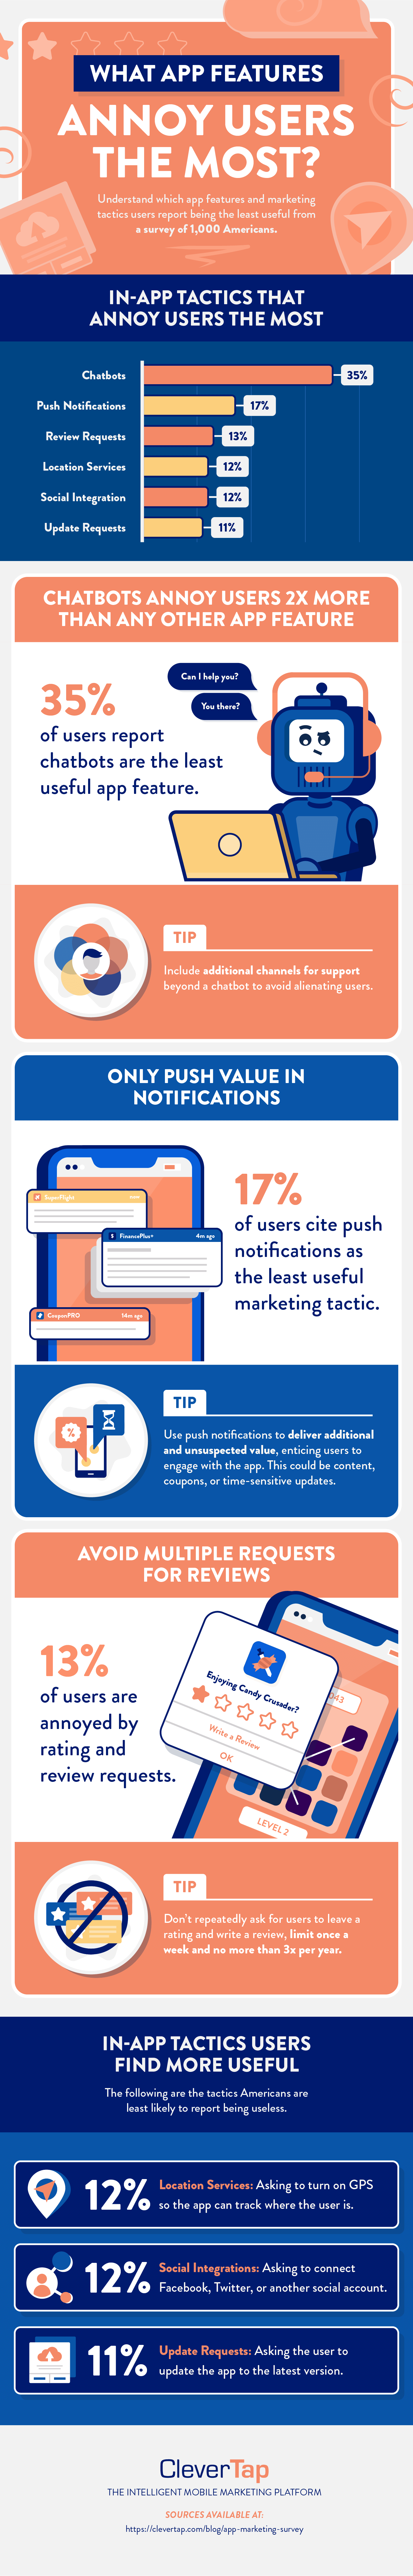 app marketing tactics users find most annoying infographic